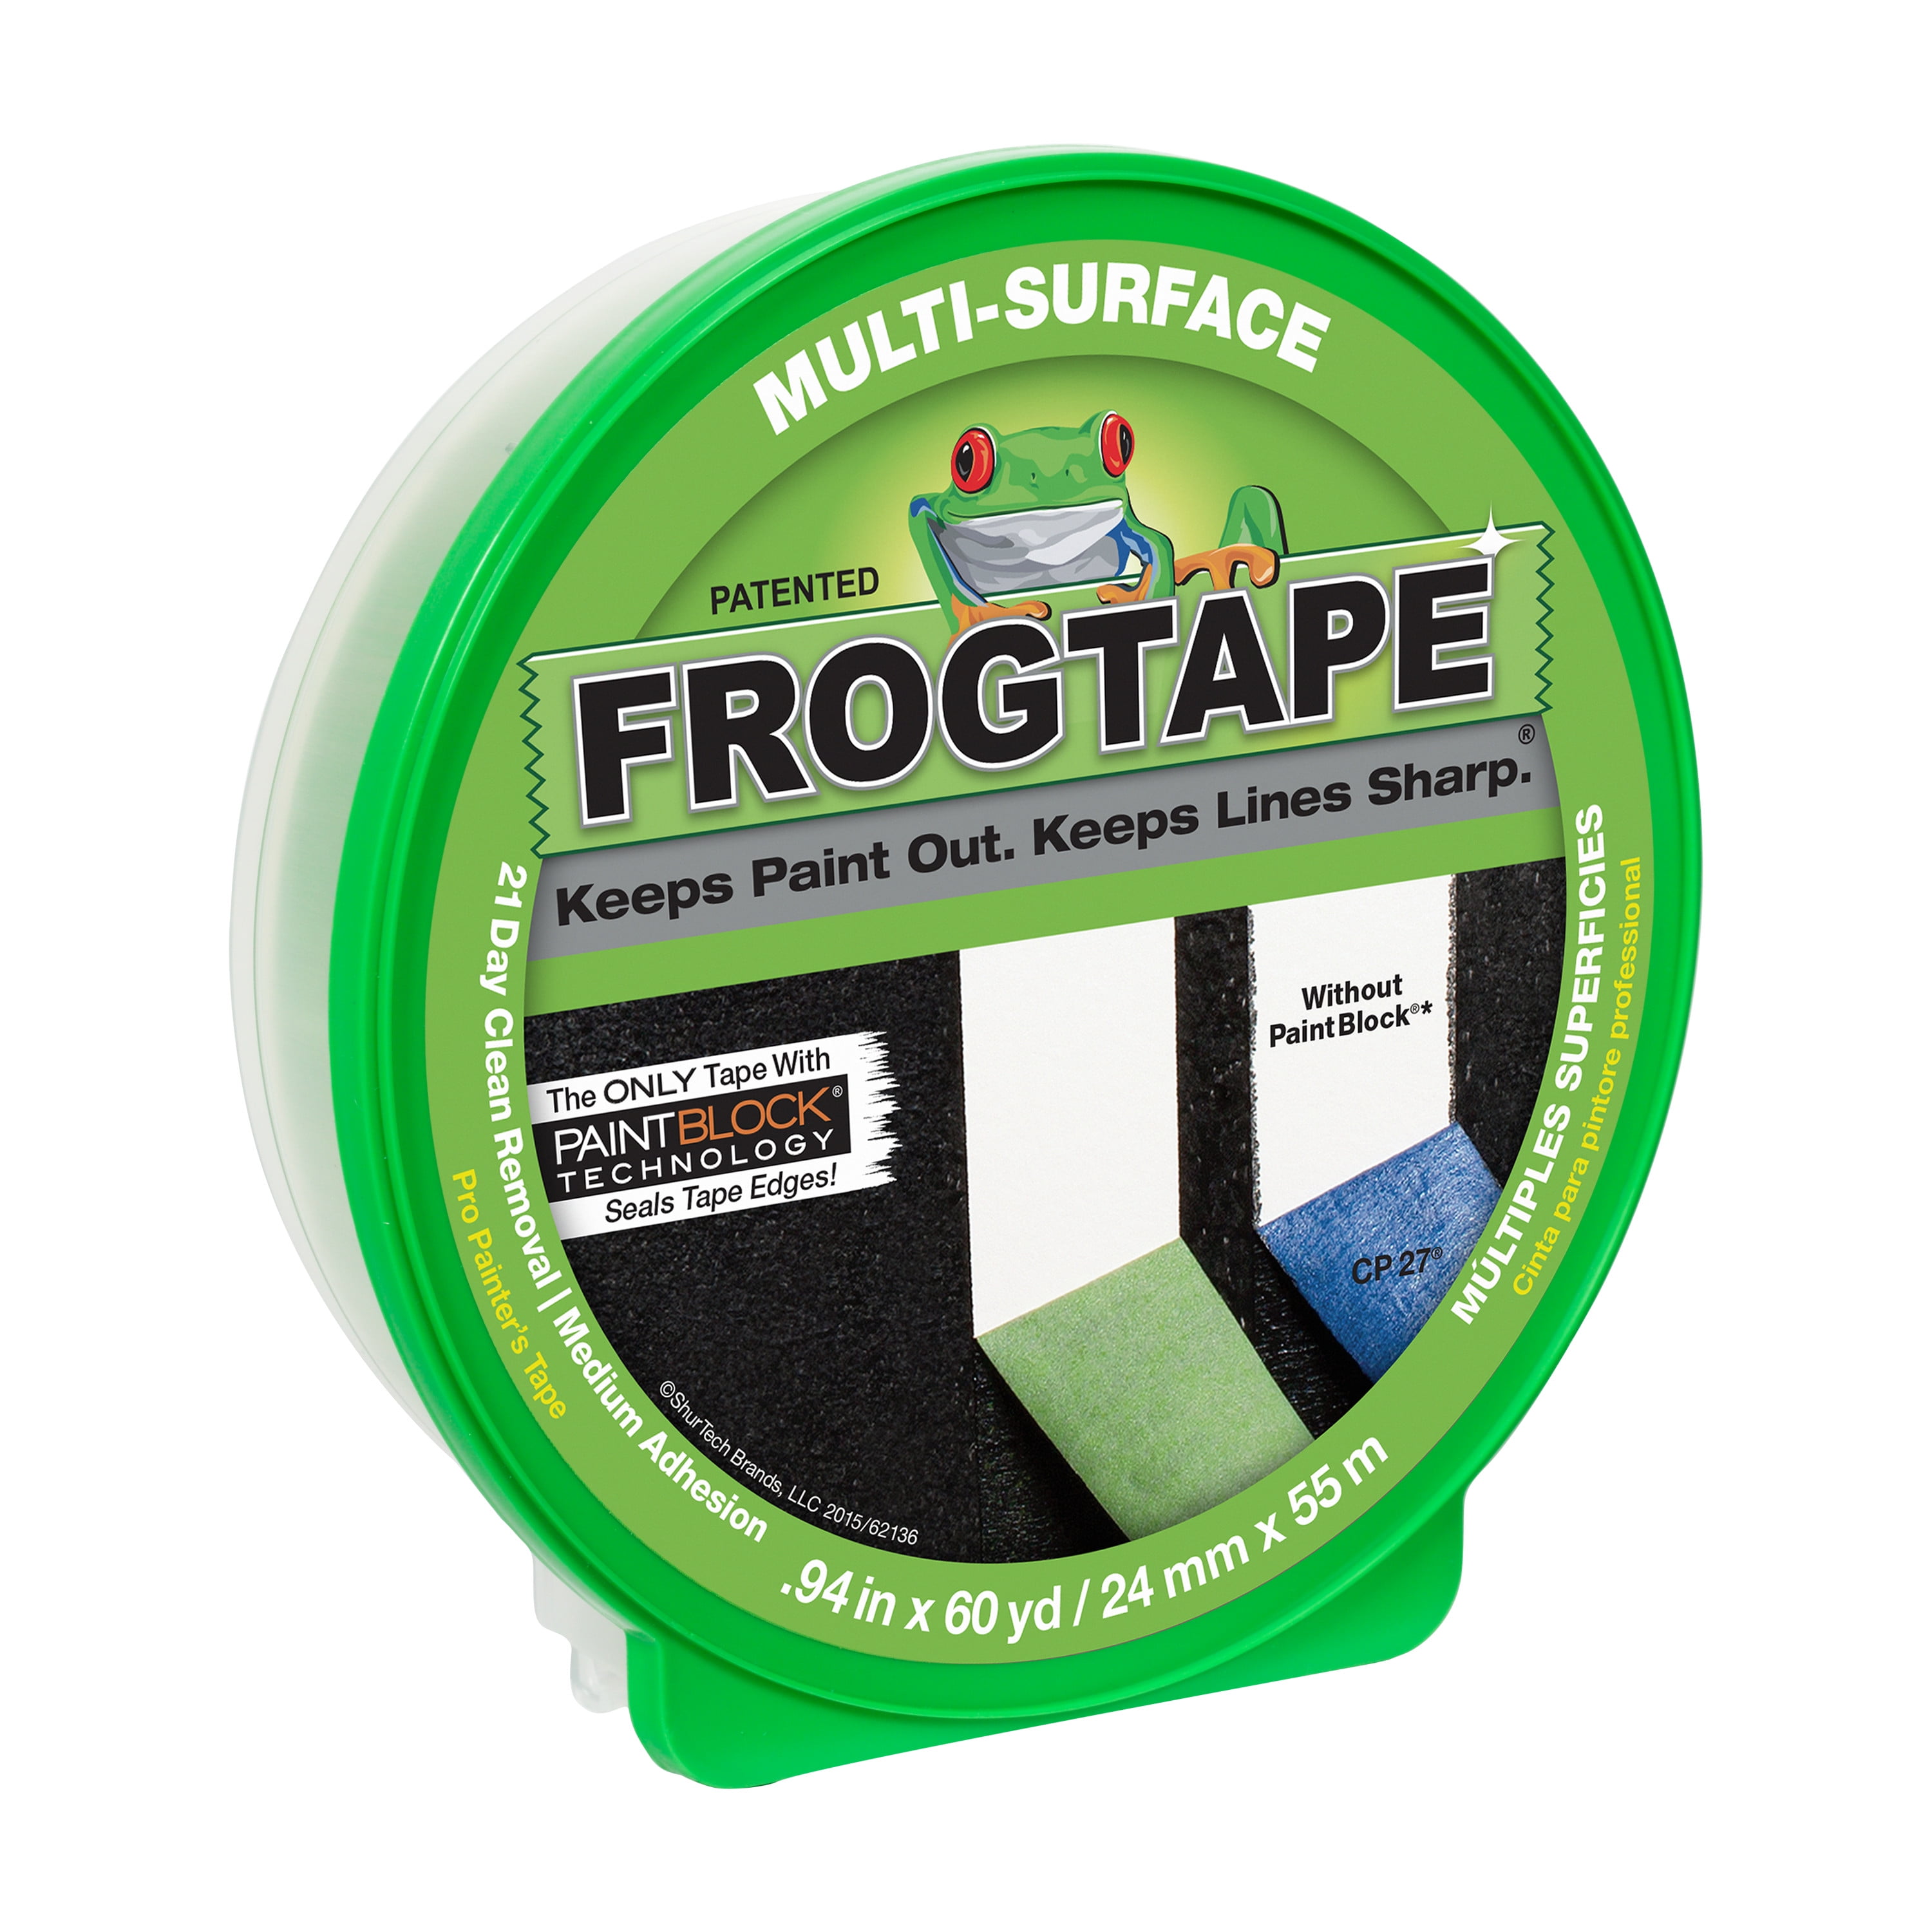 FrogTape® 0.94 x 60 yd Green Multi-Surface Painter's Tape at Menards®